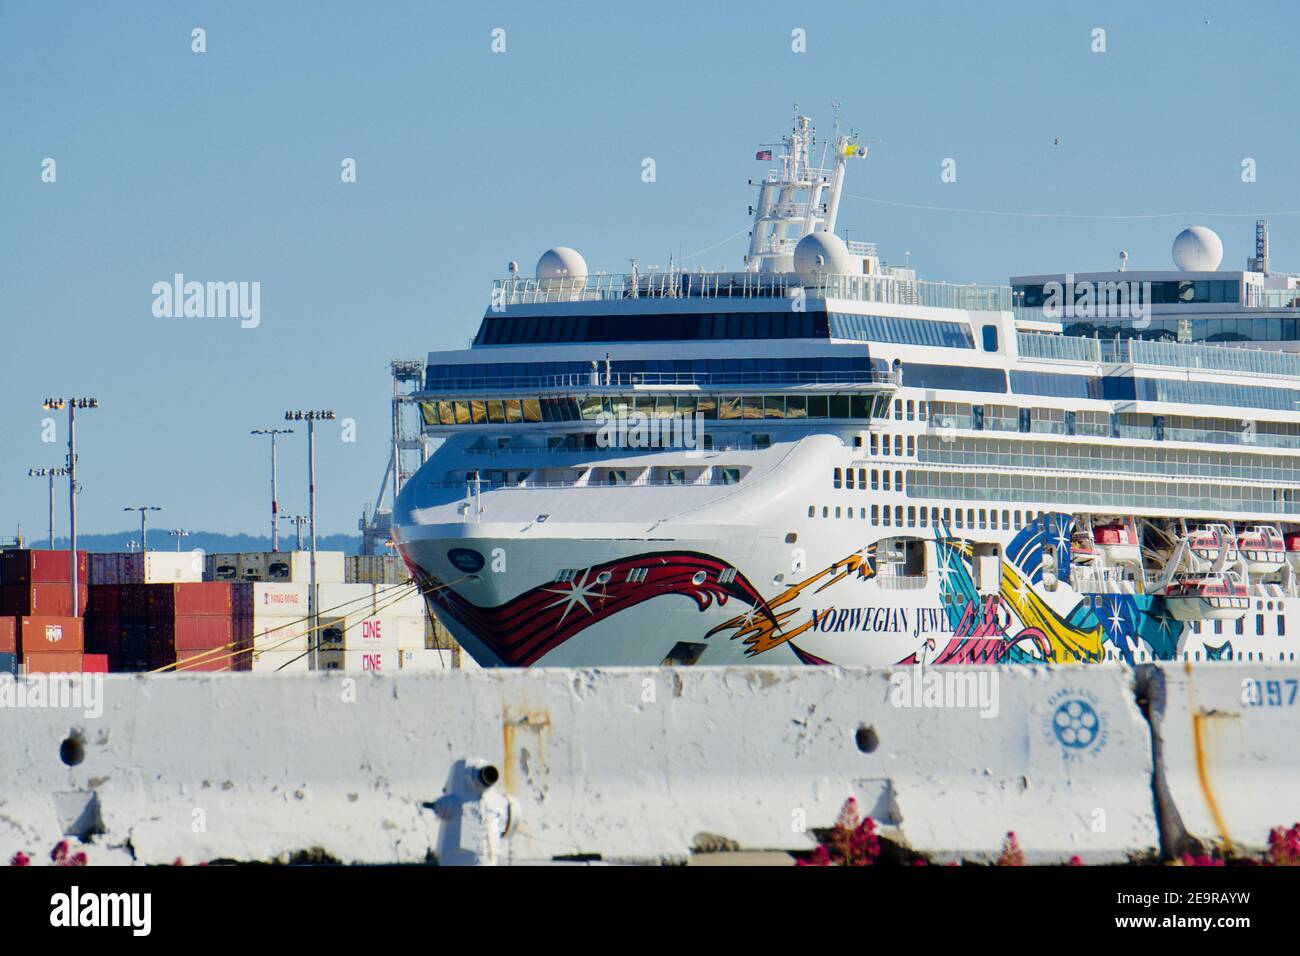 Norwegian Jewel cruise ship, operated by the Norwegian Cruise Line, parked at the Port of Oakland during COVID pandemic. Oakland, CA, USA Stock Photo